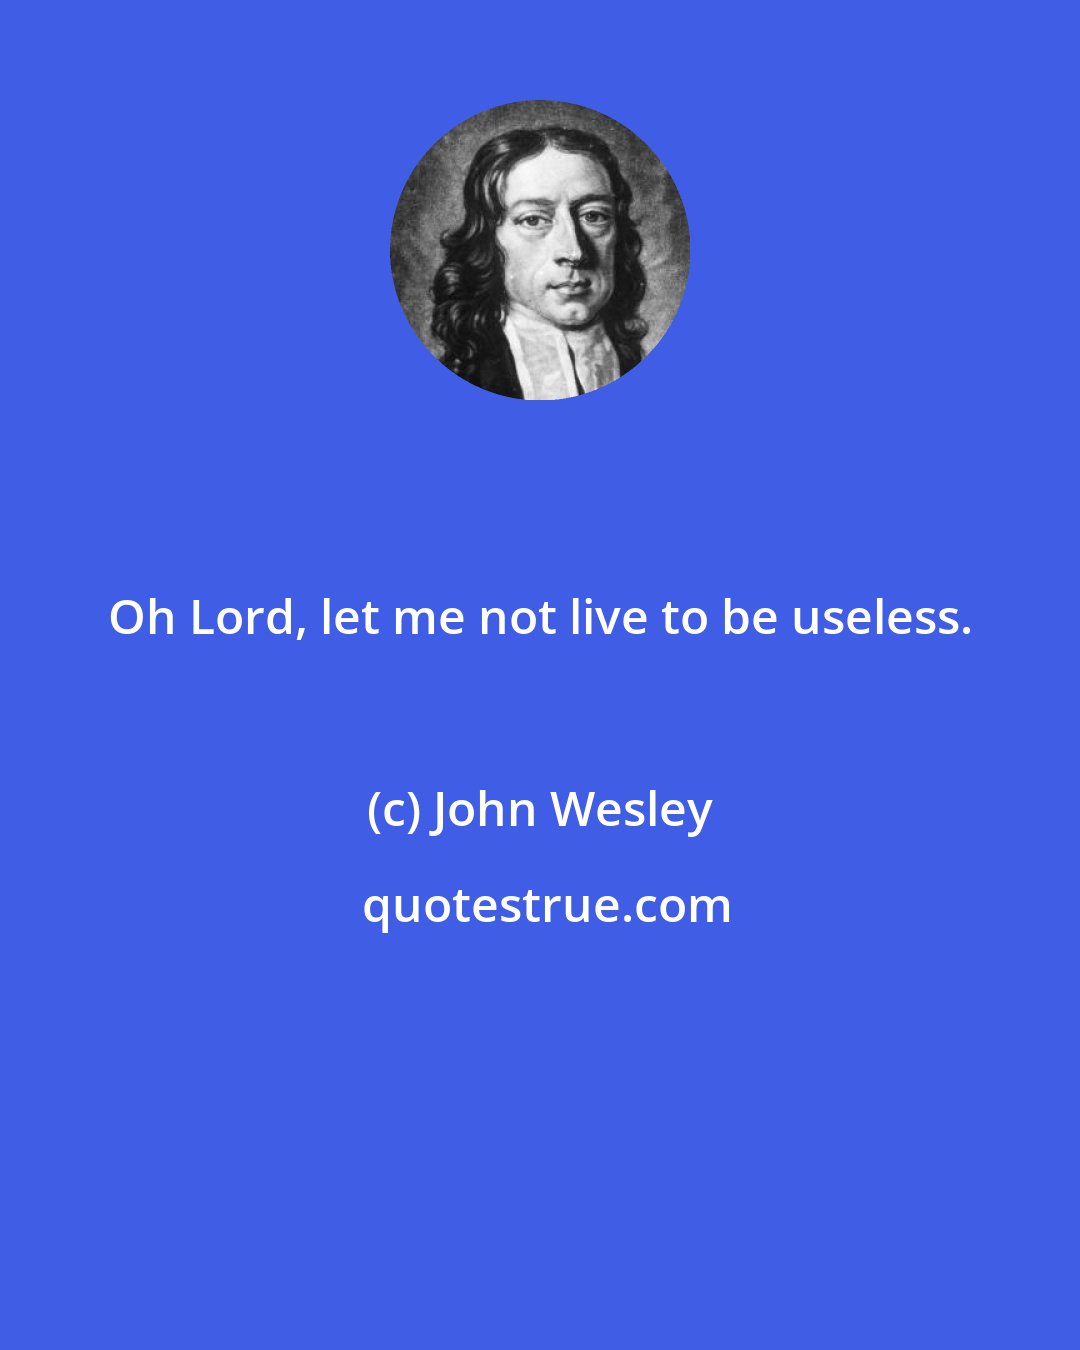 John Wesley: Oh Lord, let me not live to be useless.